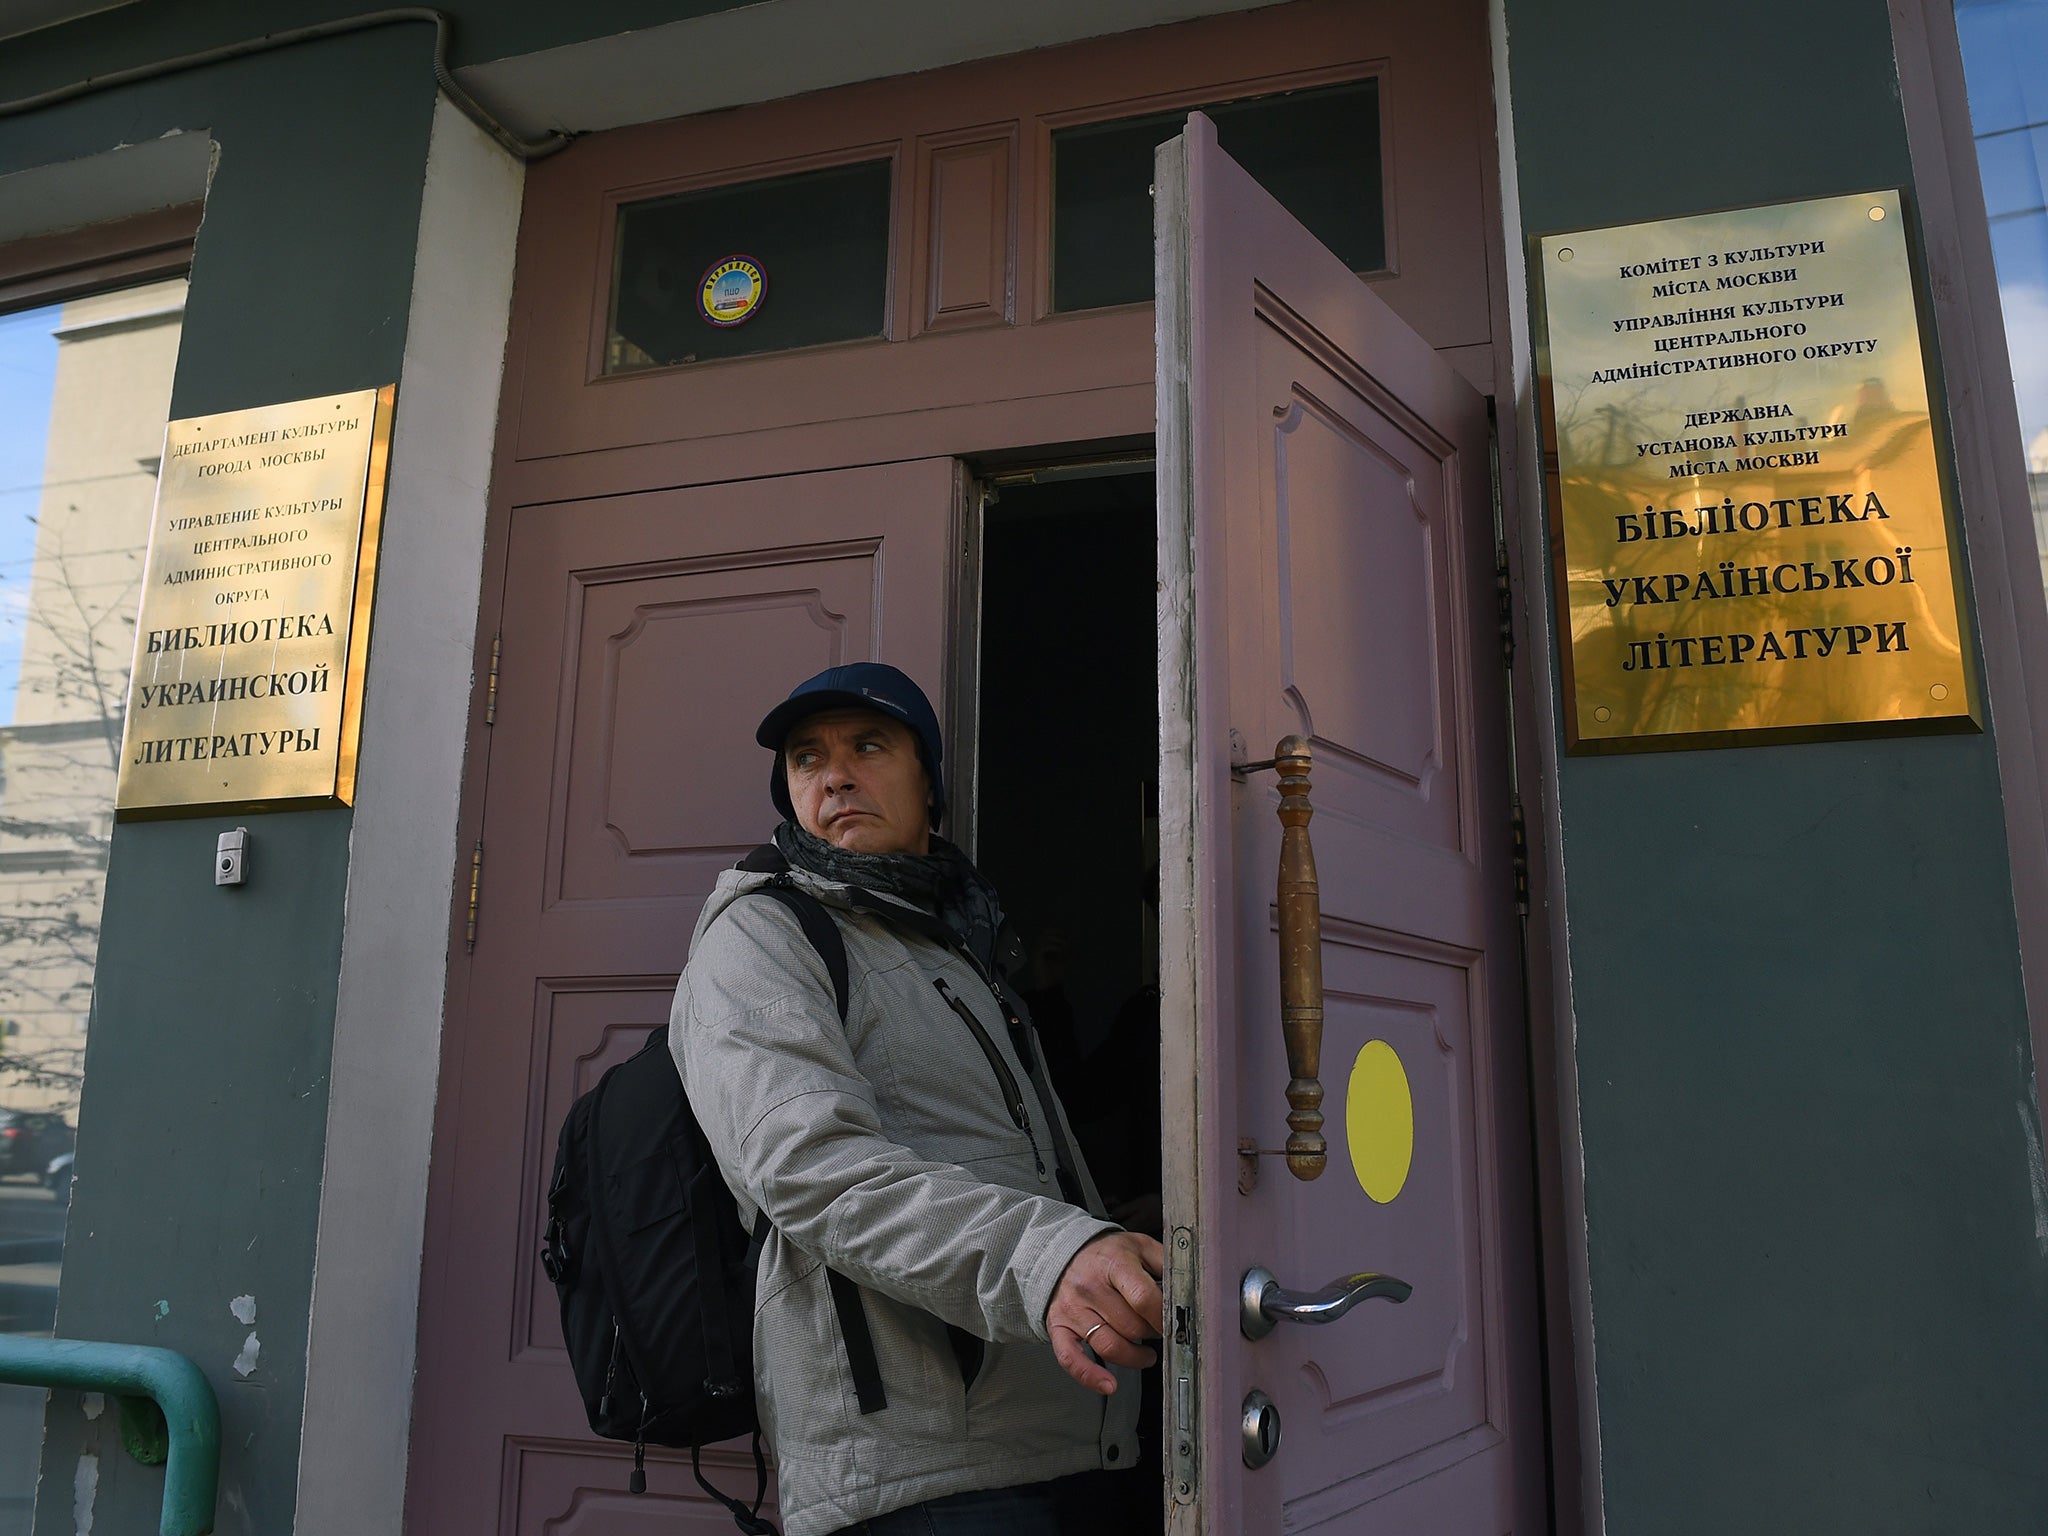 A man enters the library of Ukrainian literature in Moscow